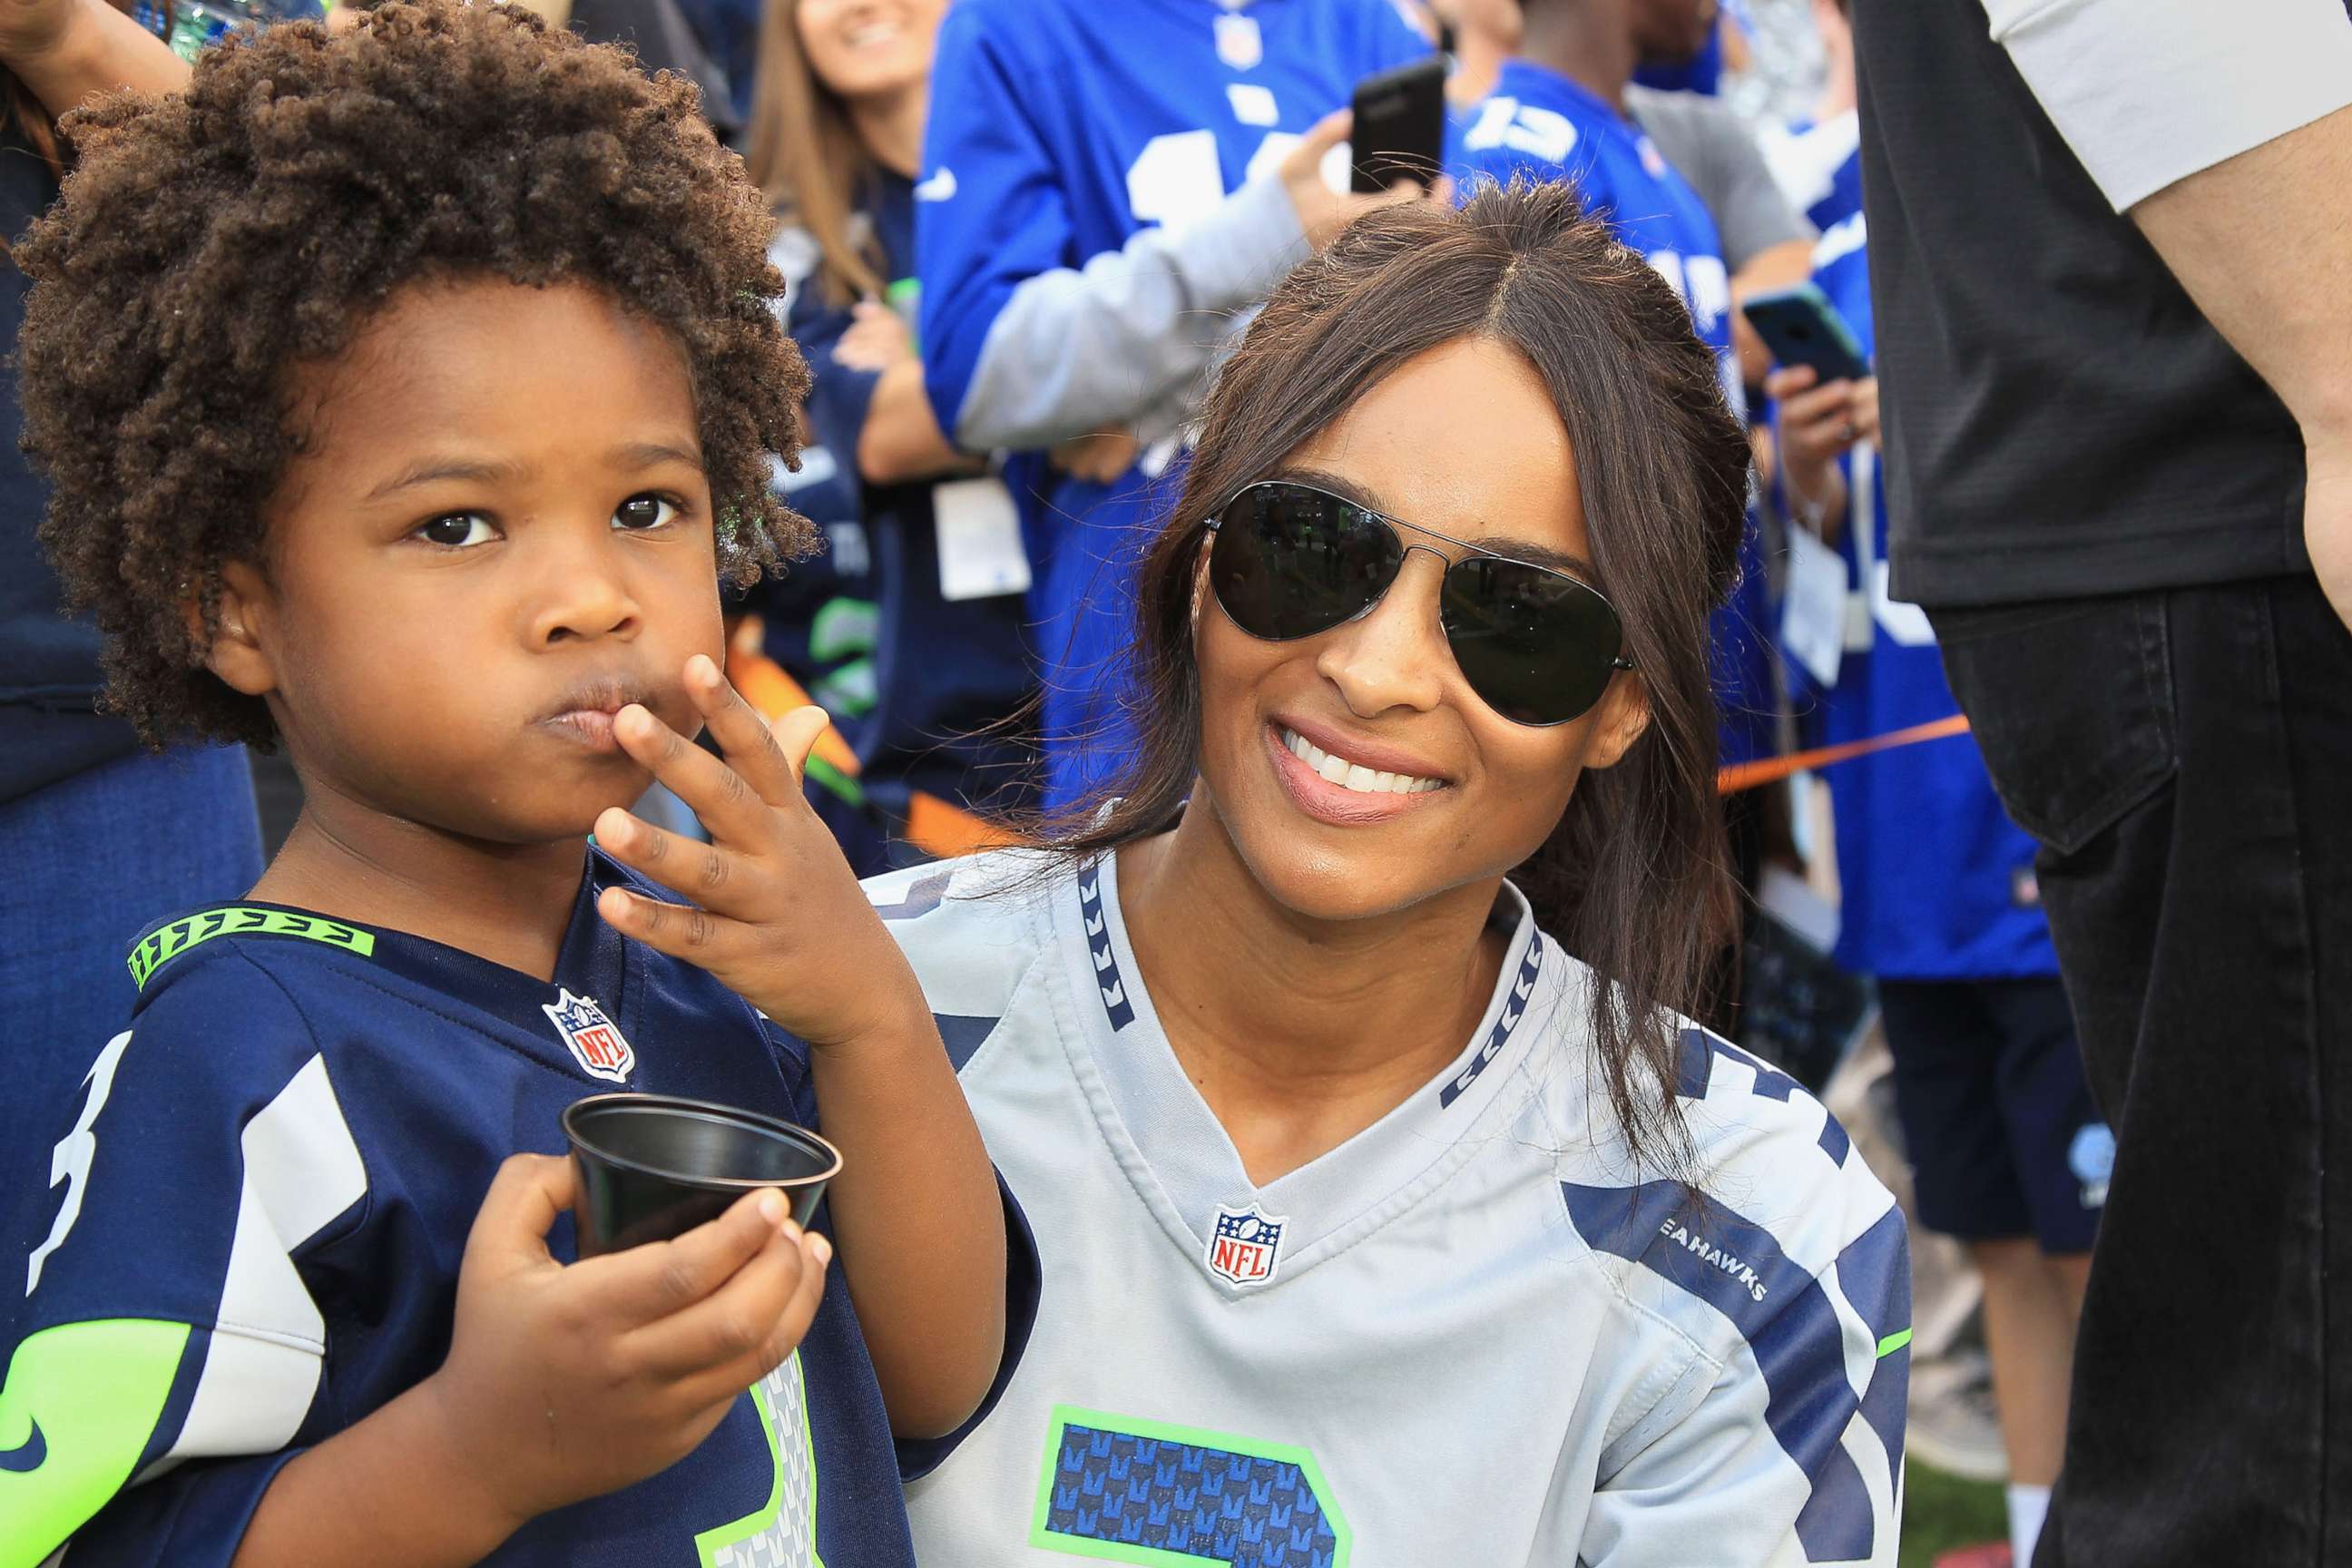 PHOTO: Ciara and her son, Future Zahir, attend the Seattle Seahawks vs. New York Giants game at MetLife Stadium, Oct. 22, 2017 in East Rutherford, New Jersey.